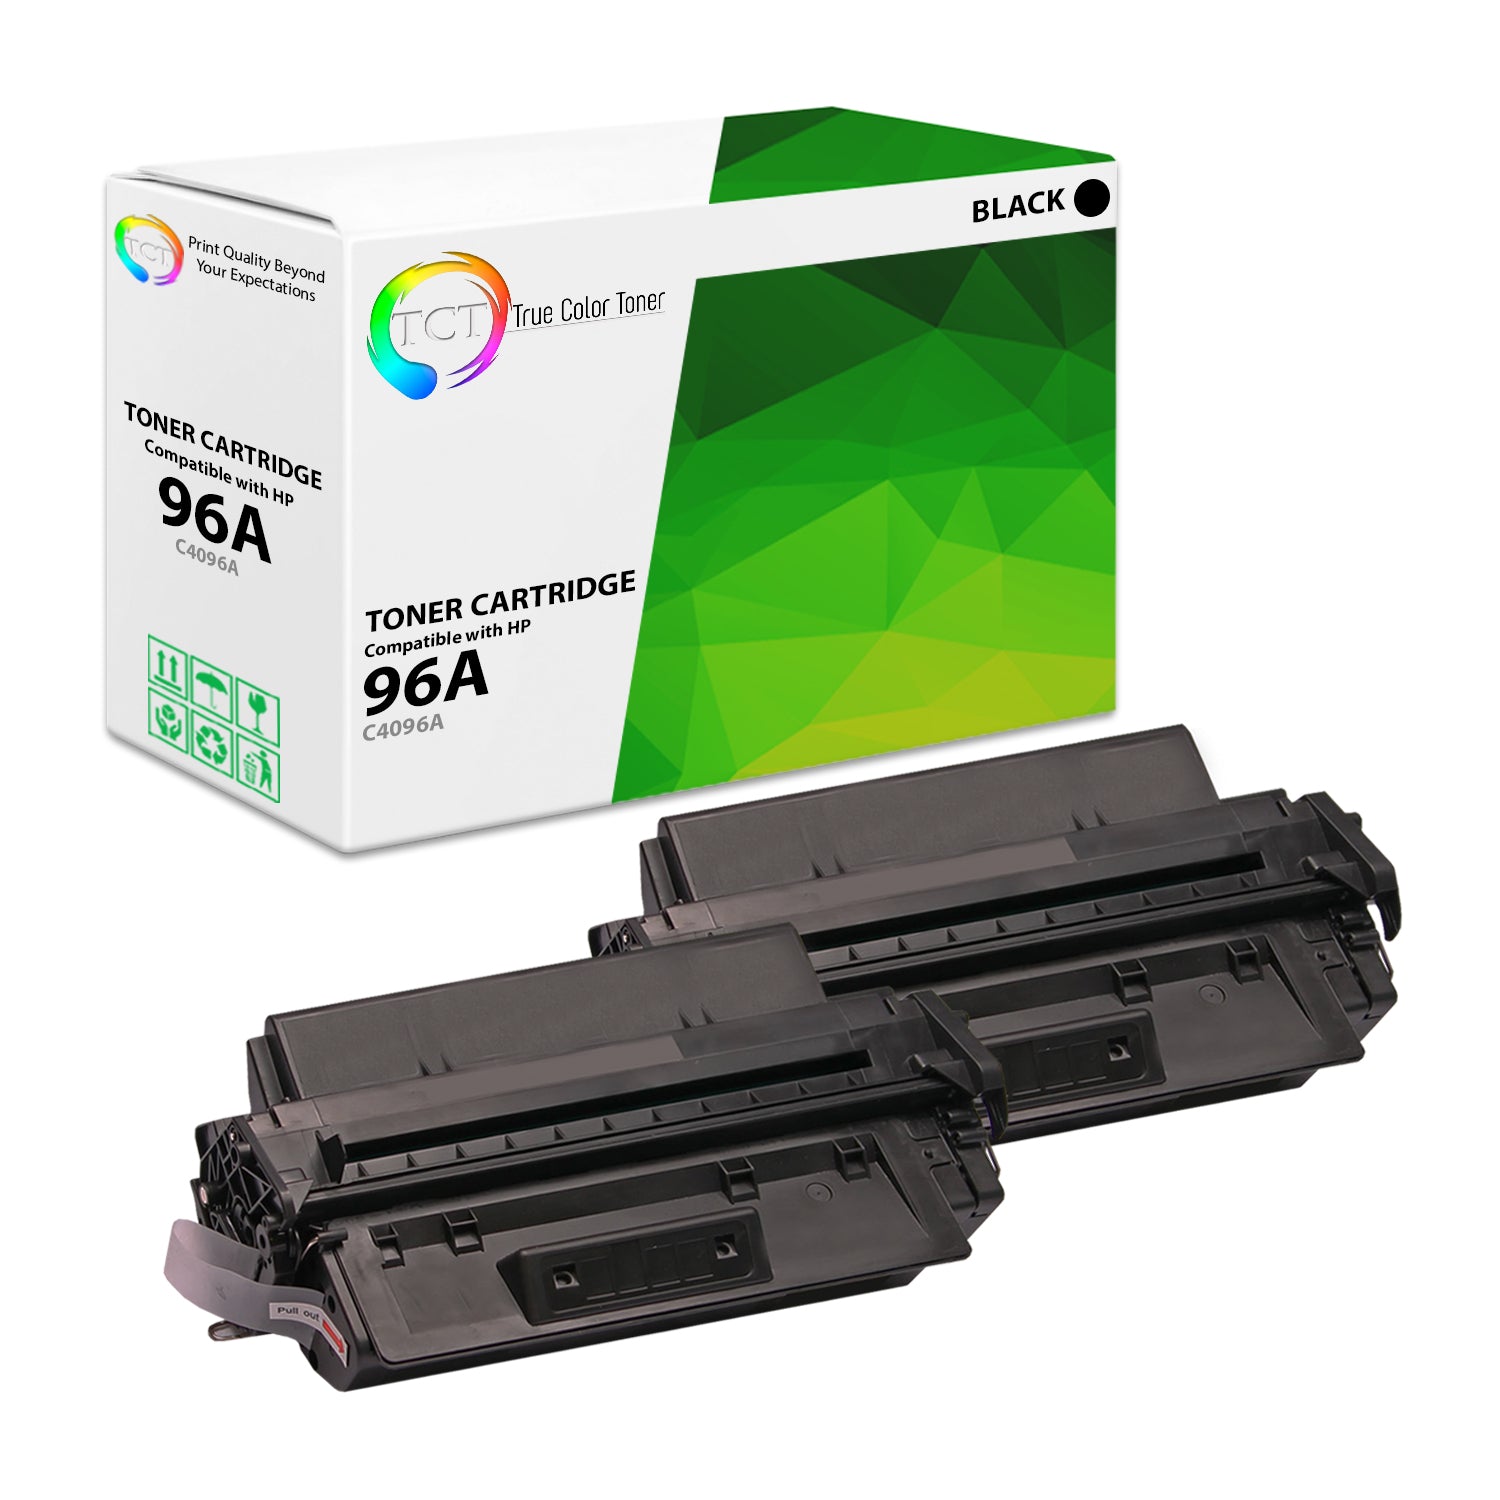 TCT Compatible Toner Cartridge Replacement for the HP 96A Series - 2 Pack Black